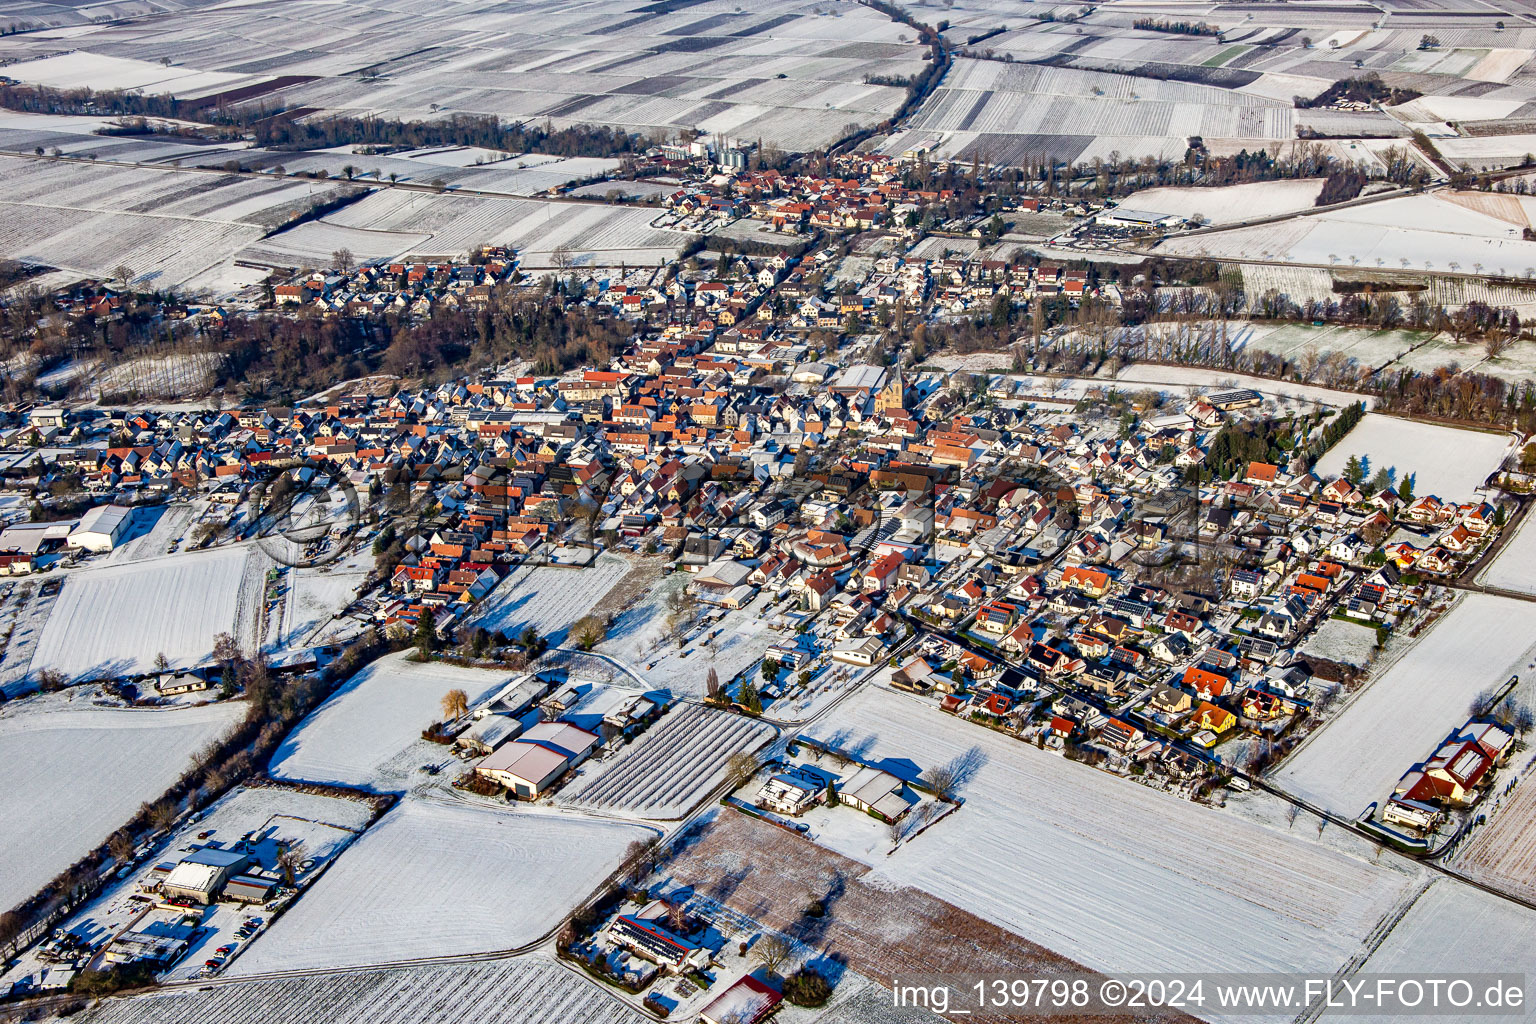 From the southeast in winter in the snow in the district Ingenheim in Billigheim-Ingenheim in the state Rhineland-Palatinate, Germany